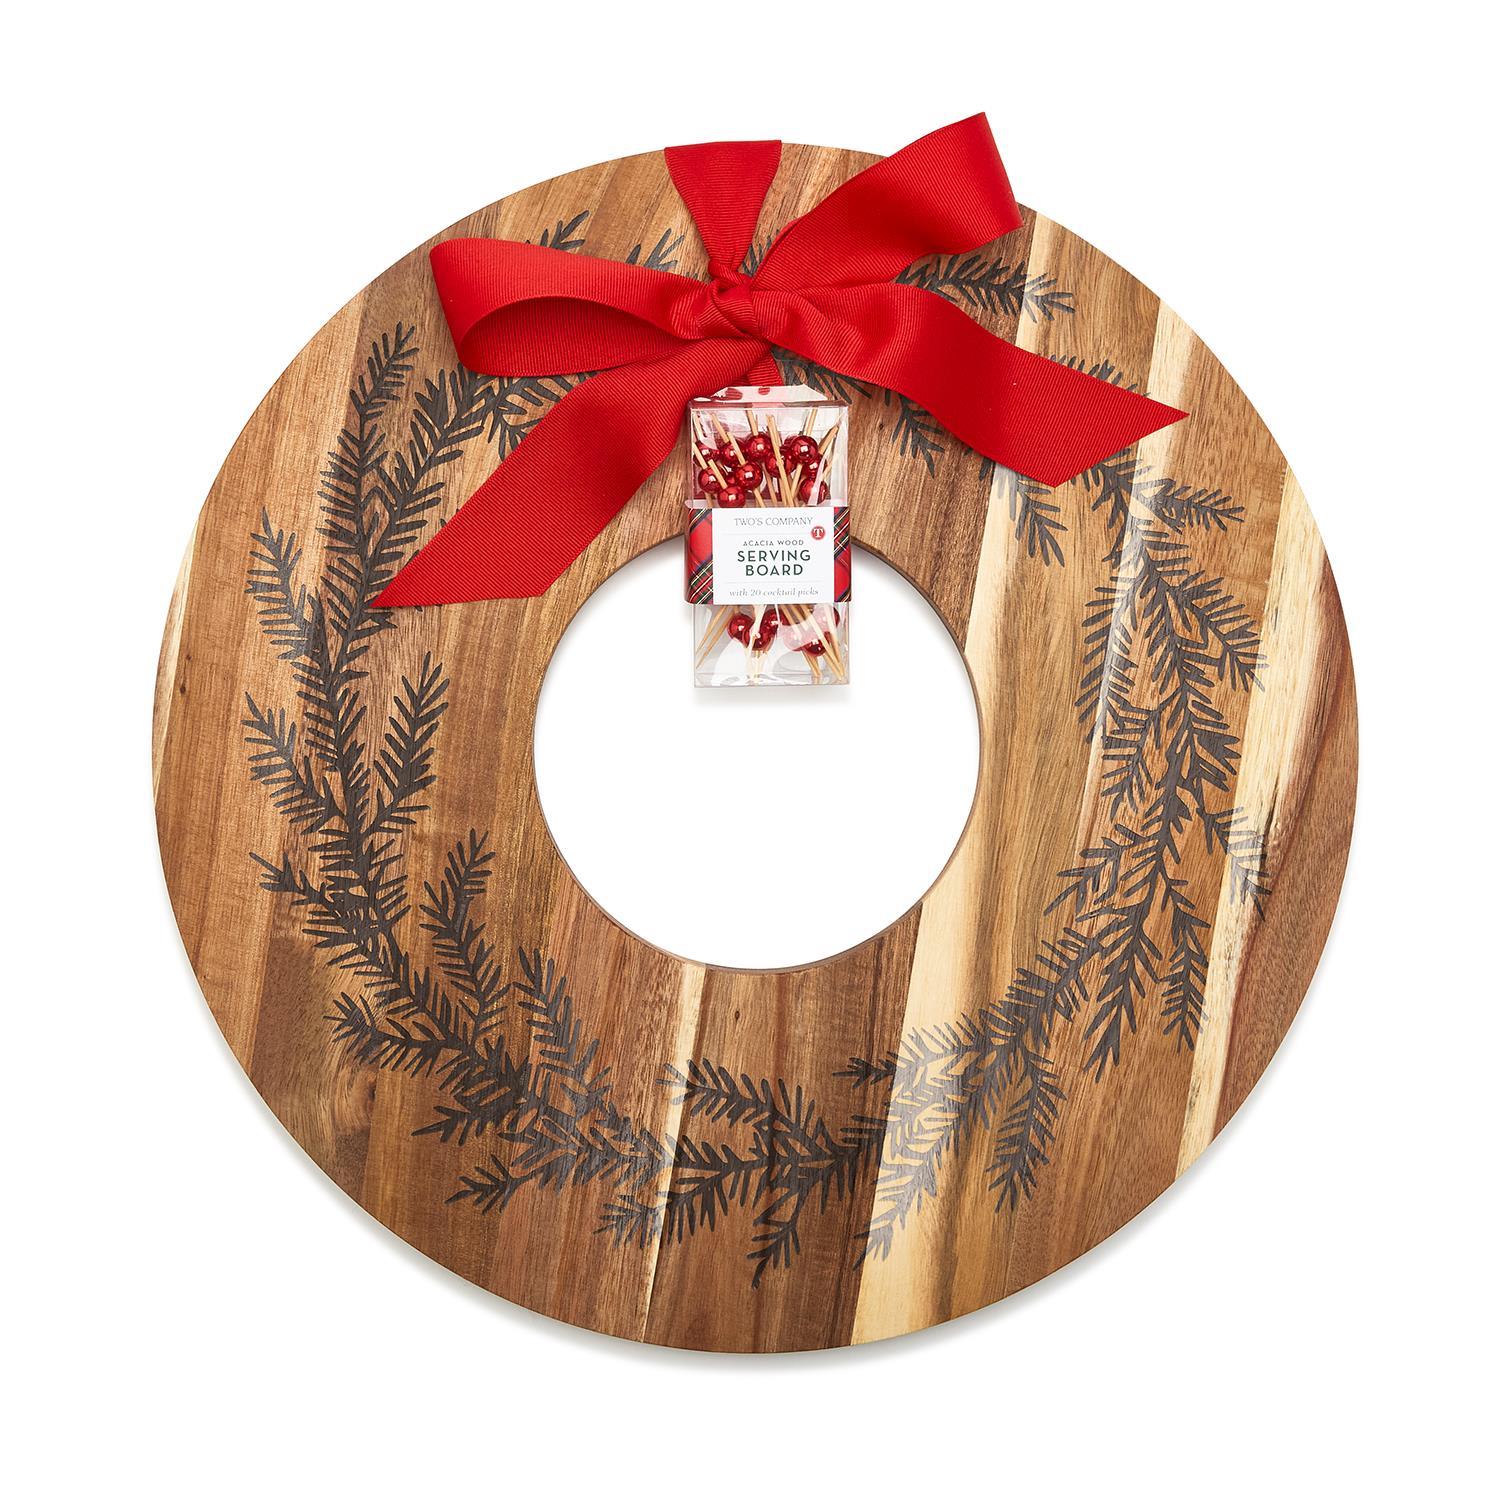 Wreath Serving Board with 20 Picks